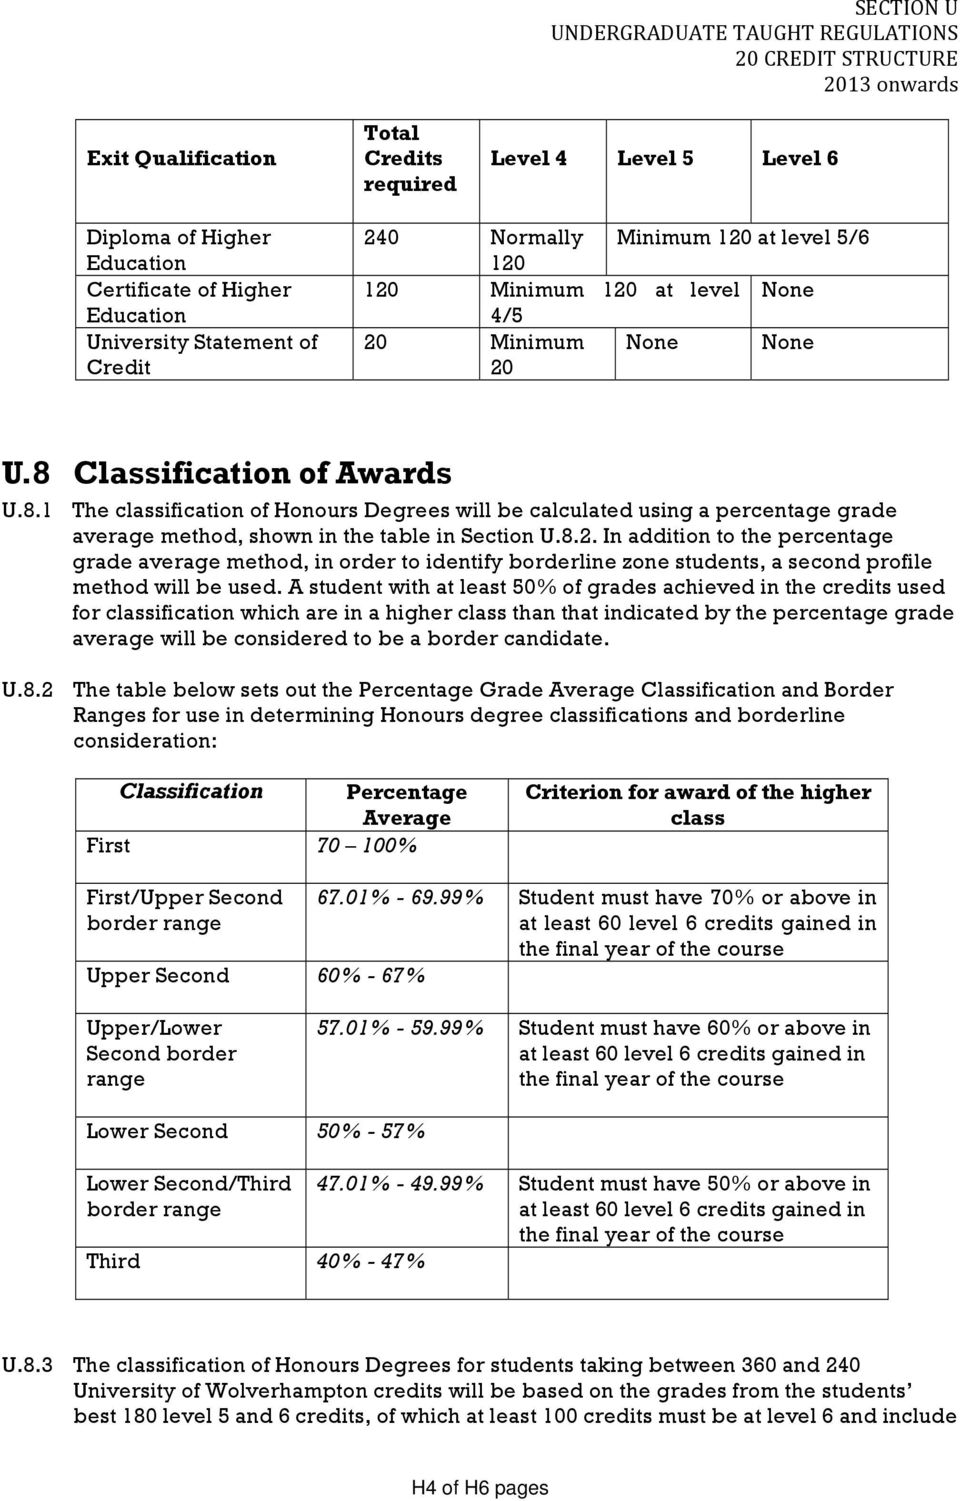 Classification of Awards U.8.1 The classification of Honours Degrees will be calculated using a percentage grade average method, shown in the table in Section U.8.2.